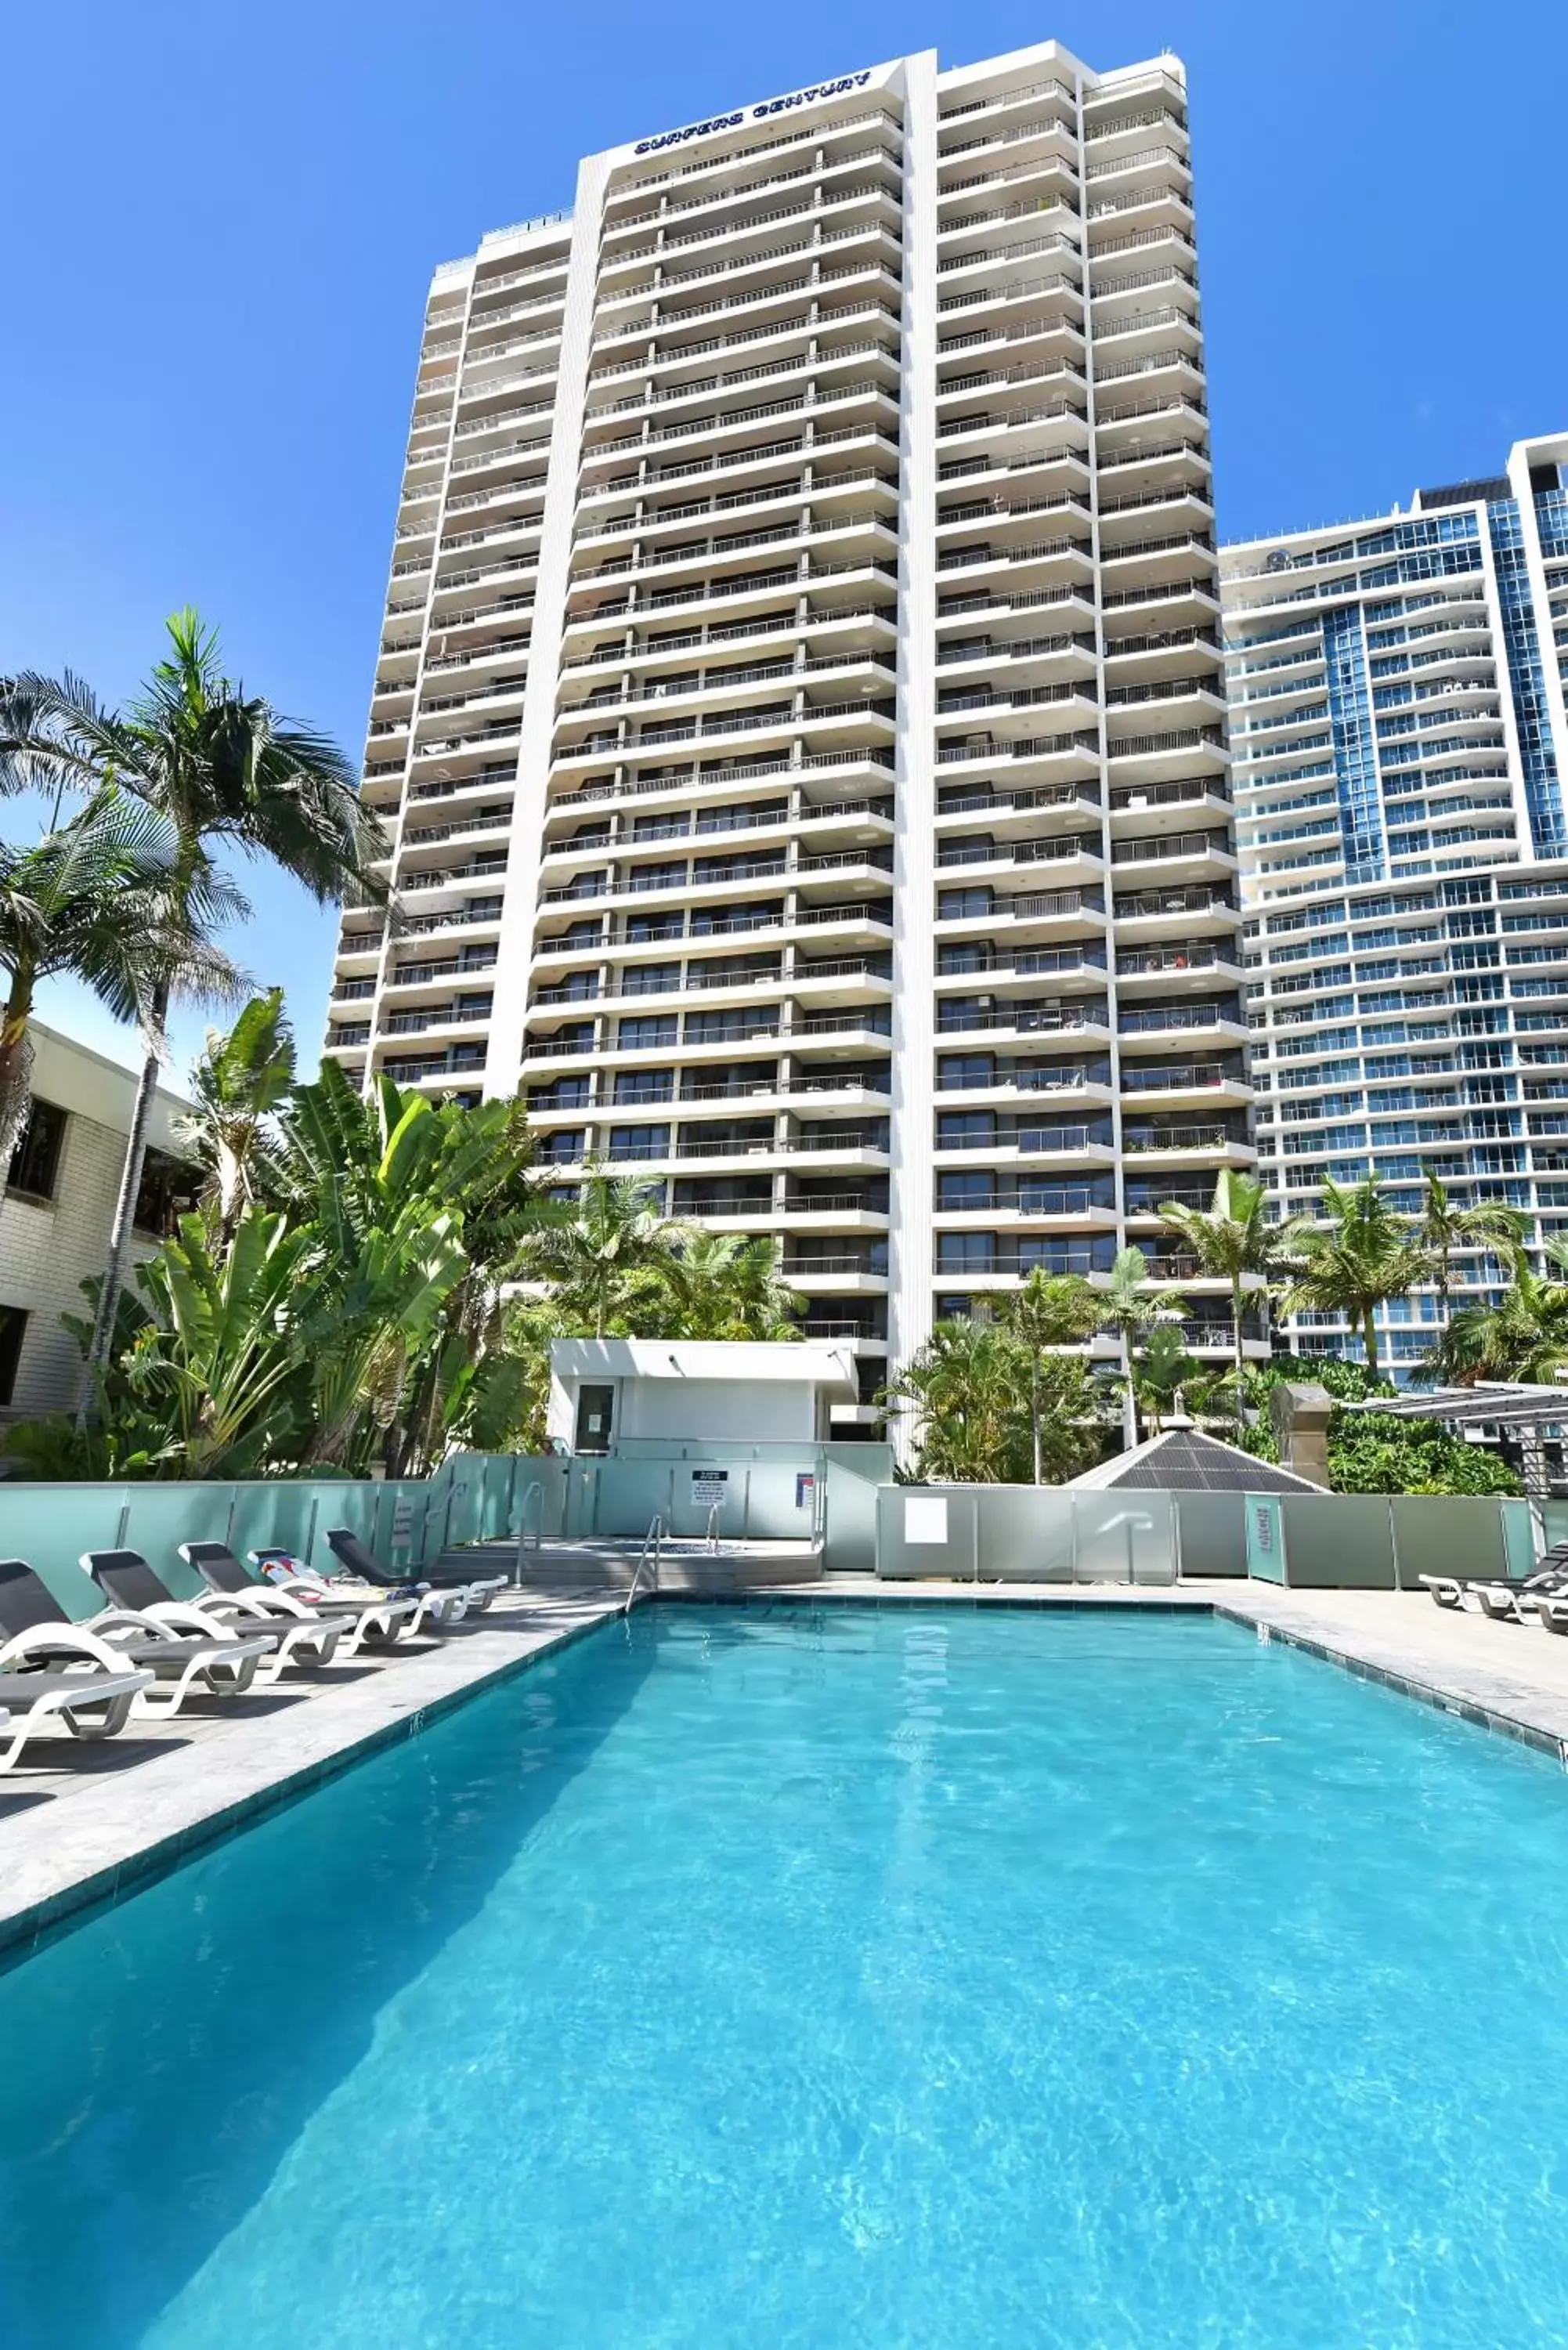 Swimming Pool in Surfers Century Oceanside Apartments